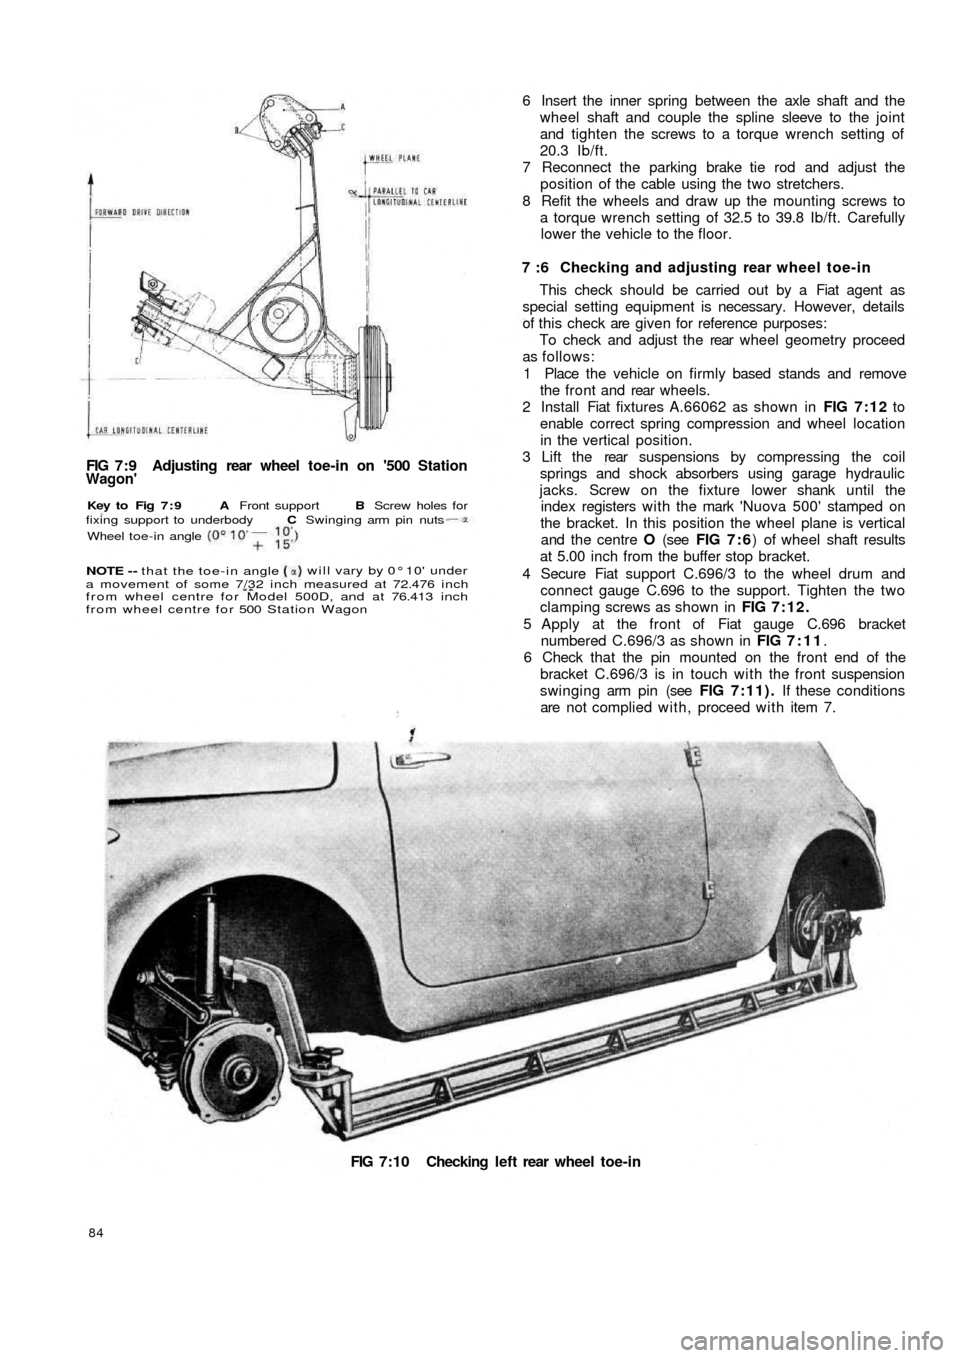 FIAT 500 1967 1.G Workshop Manual FIG 7:9  Adjusting  rear  wheel toe-in on 500 StationWagon
FIG 7:10 Checking left rear wheel toe-in
84
6 Insert the inner spring between the axle shaft and the
wheel shaft and couple the spline slee